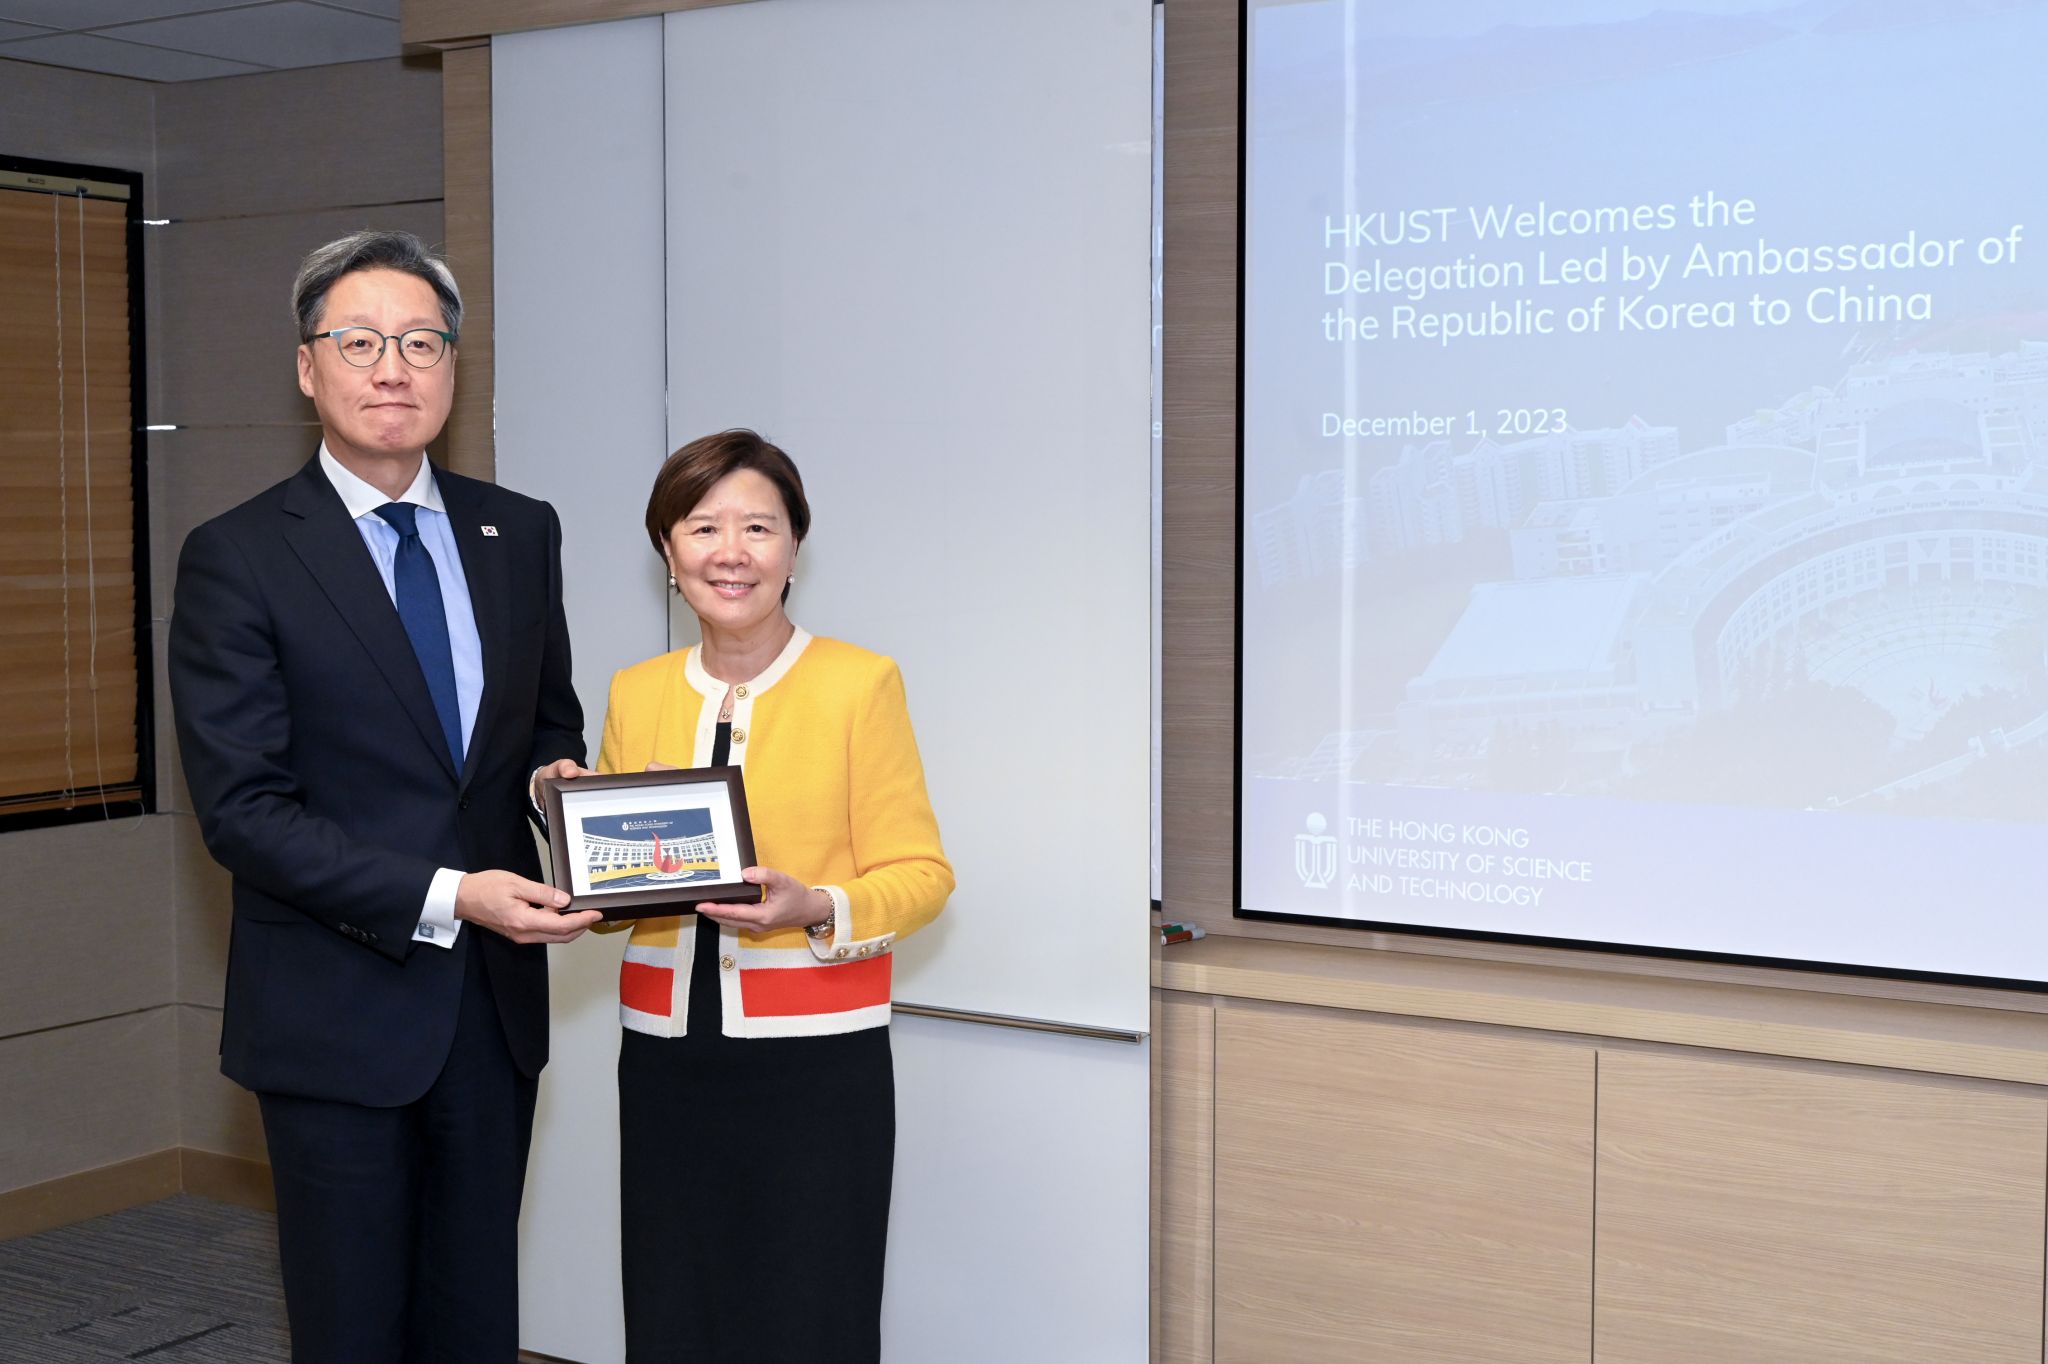 President Prof. Nancy IP (right) presented HKUST souvenir to Dr. Chung (left).